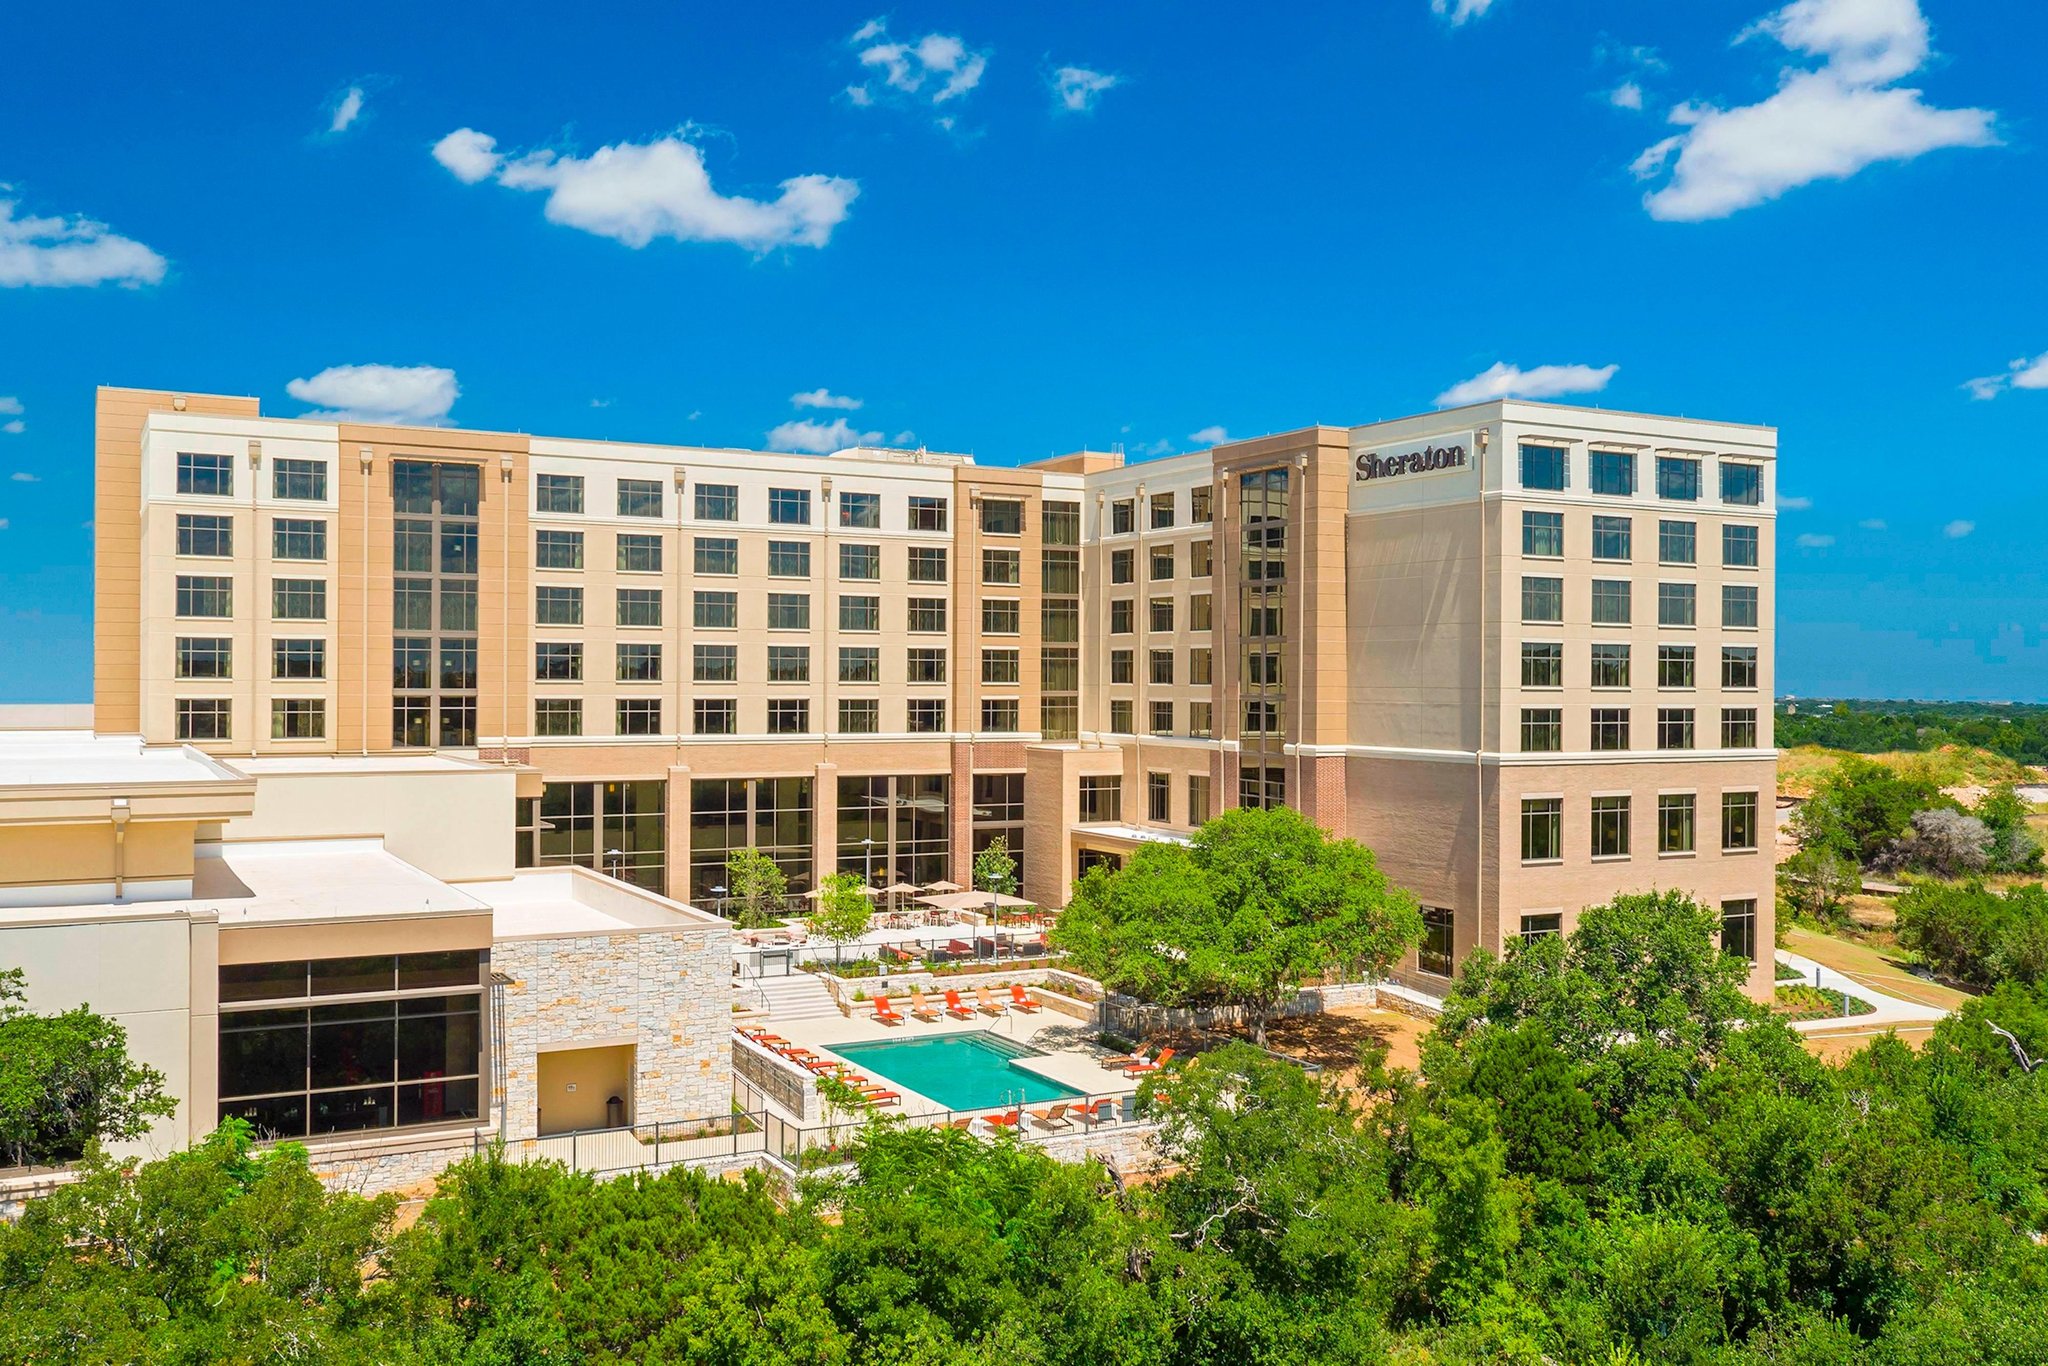 Meetings And Events At Sheraton Austin Georgetown Hotel